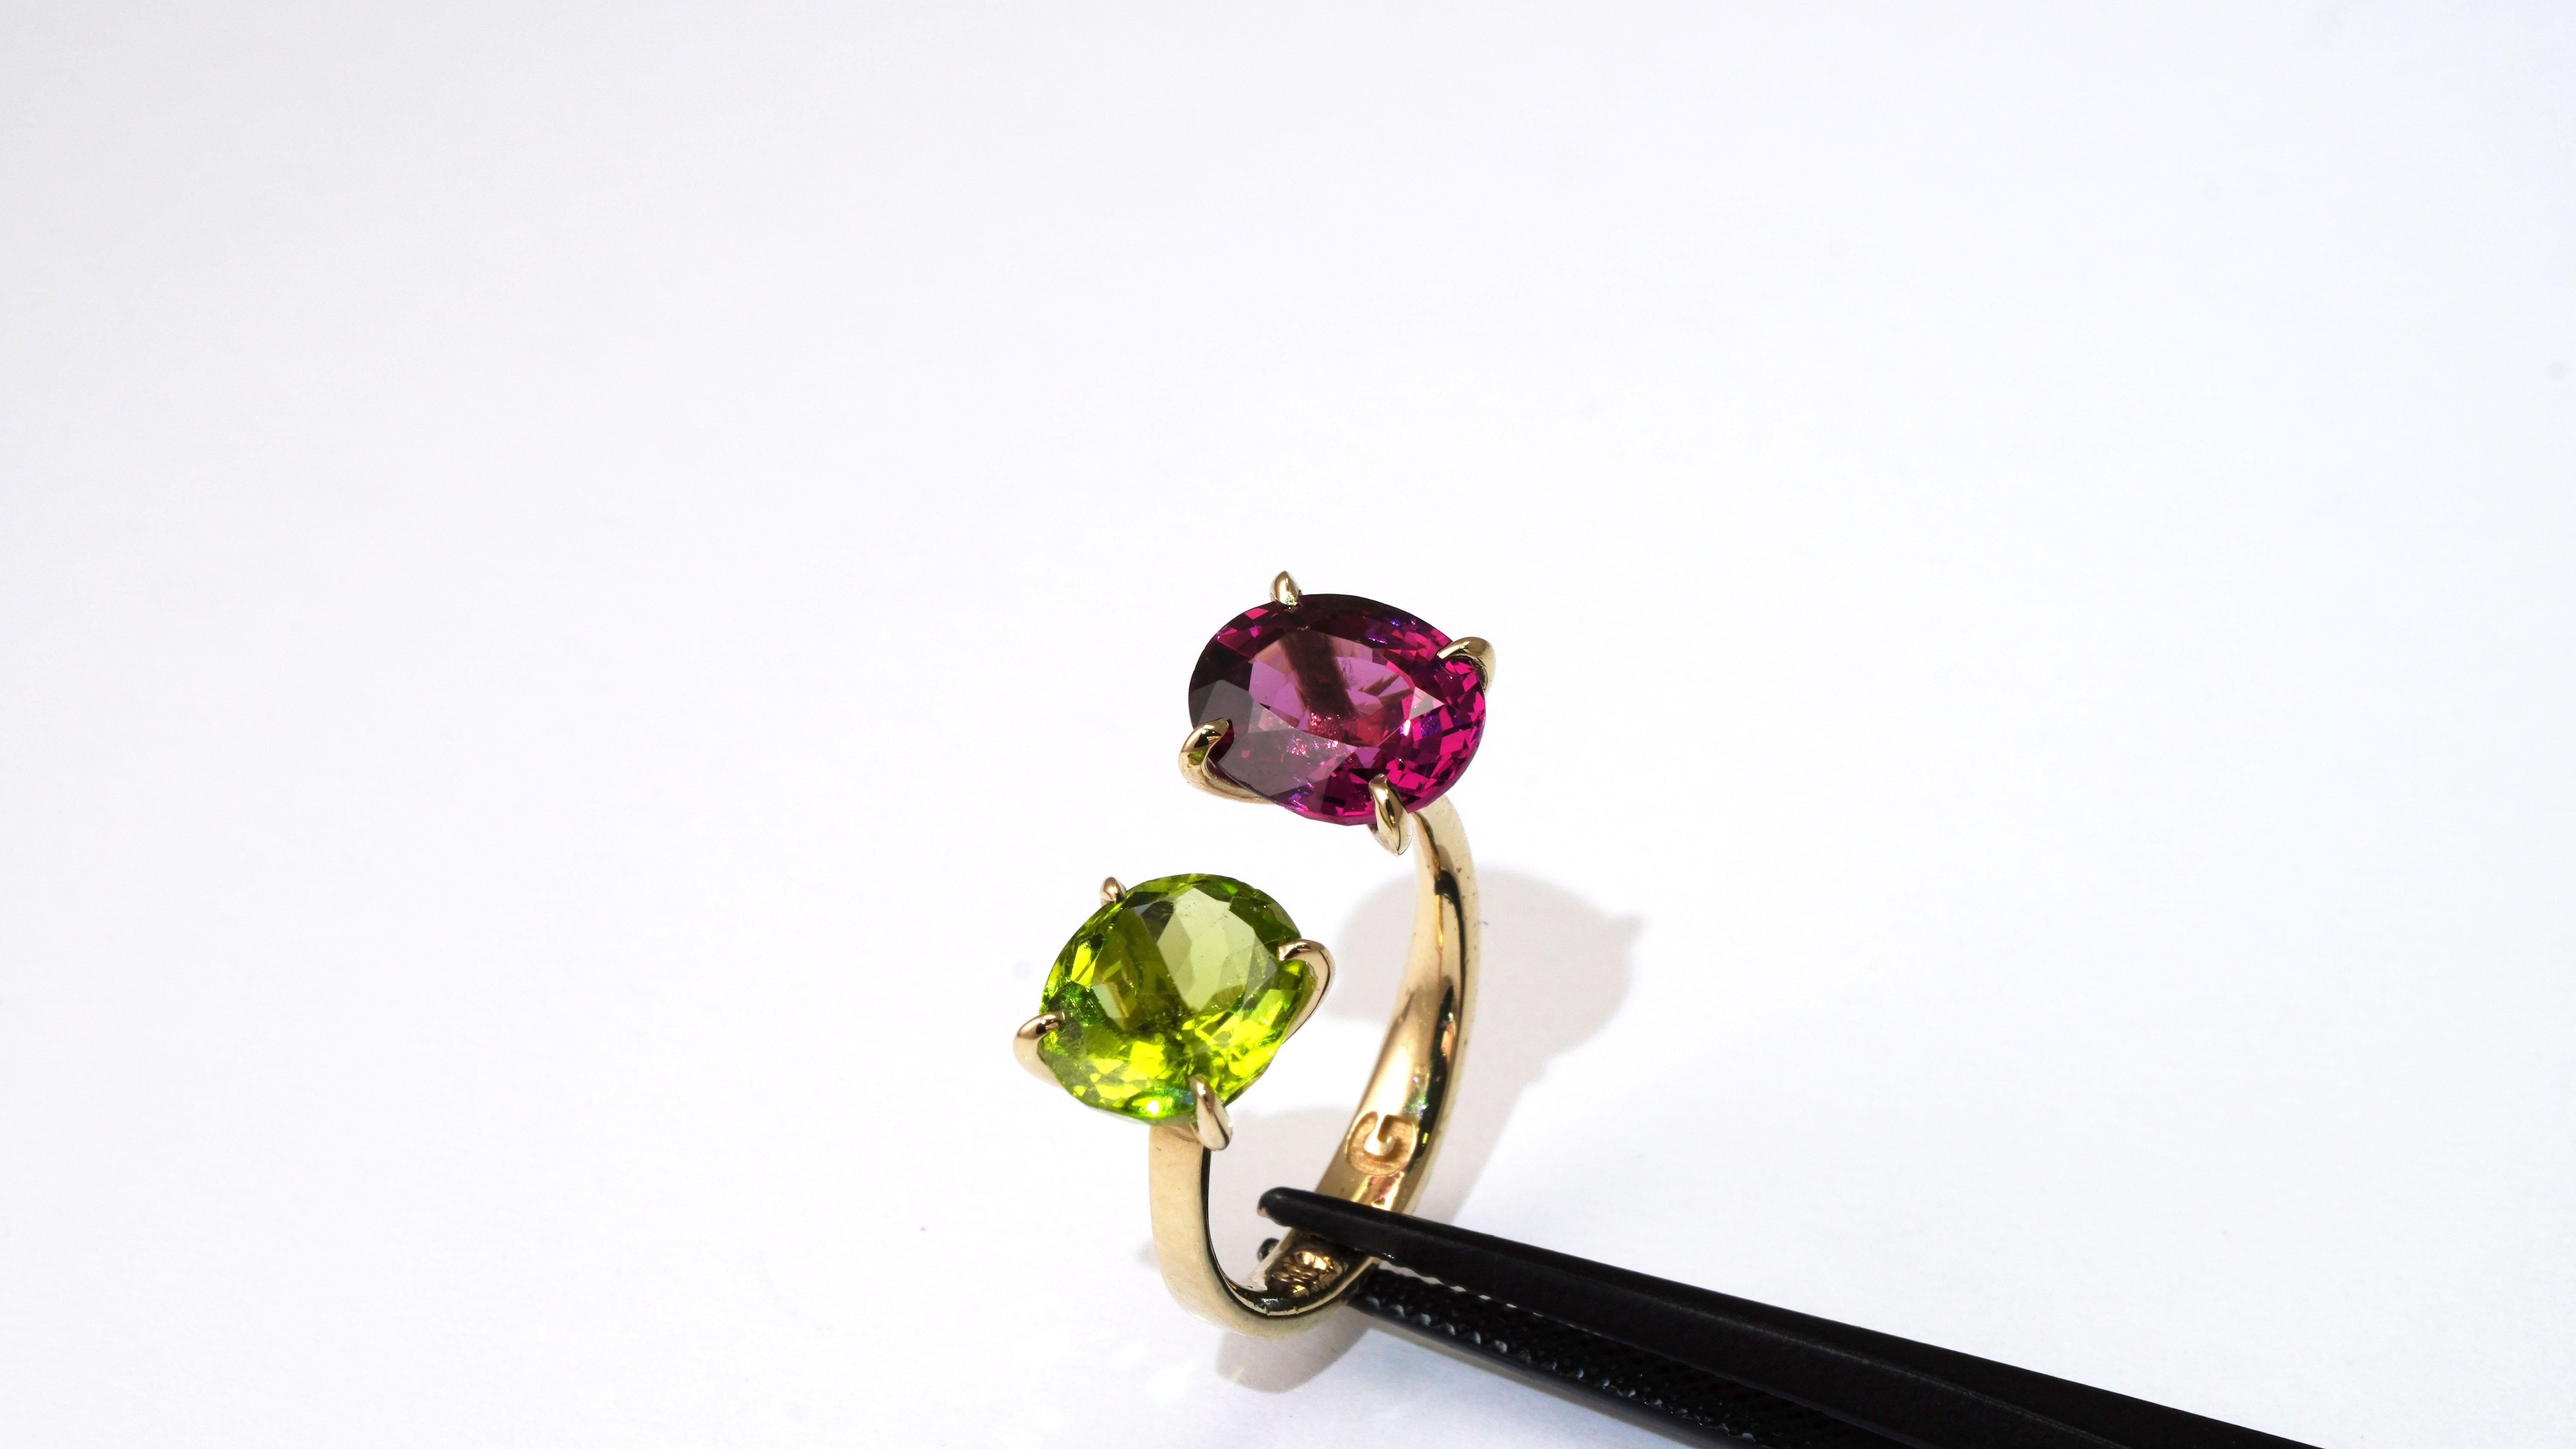 14 kt Gold Ring with Peridot and Purple Rhodolite Garnet
Gold color: Yellow
Ring size: 4 US
Total weight: 2.64 grams

Set with:
- Peridot
Cut: Mix
Weight: 1.92 carat
Color: Green
- Rhodolite Garnet
Cut: Mix
Weight: 2.45 carat
Color: Purple